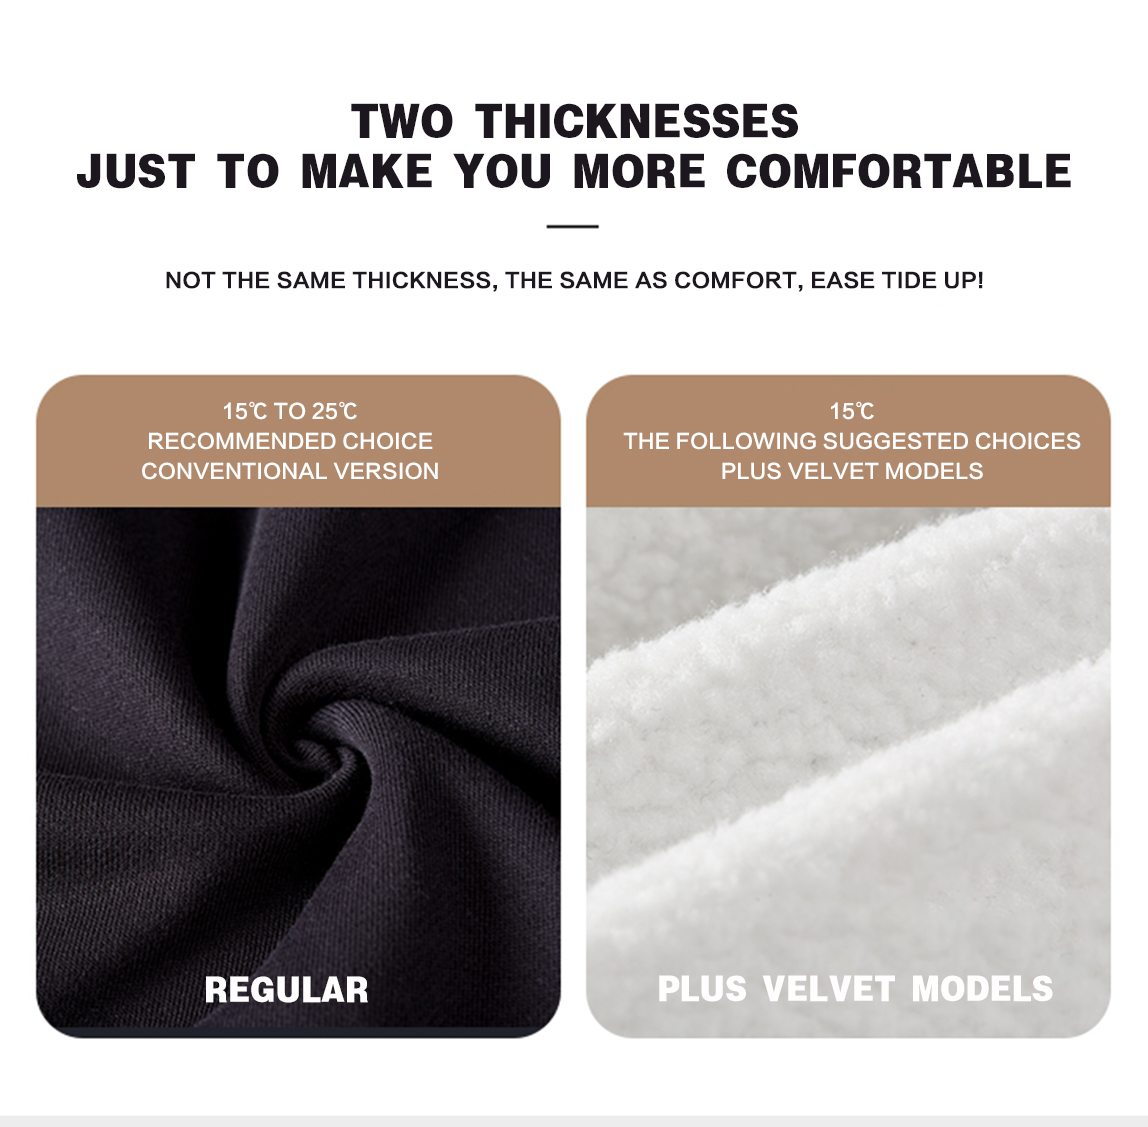 Two thickness options